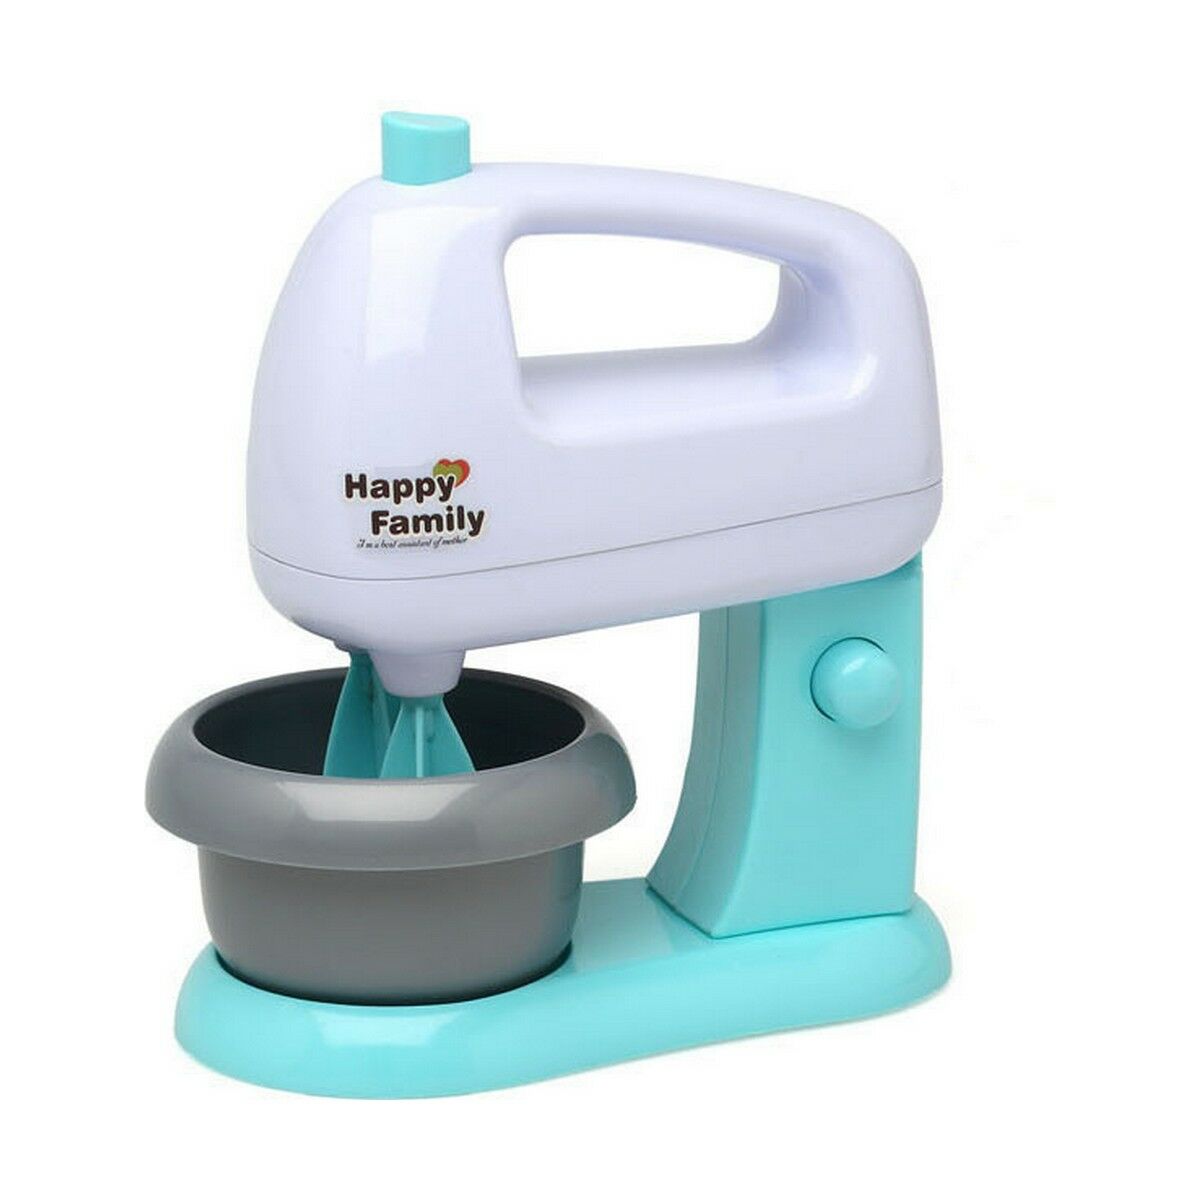 Toy blender Electric Toy 21 x 21 cm - Little Baby Shop